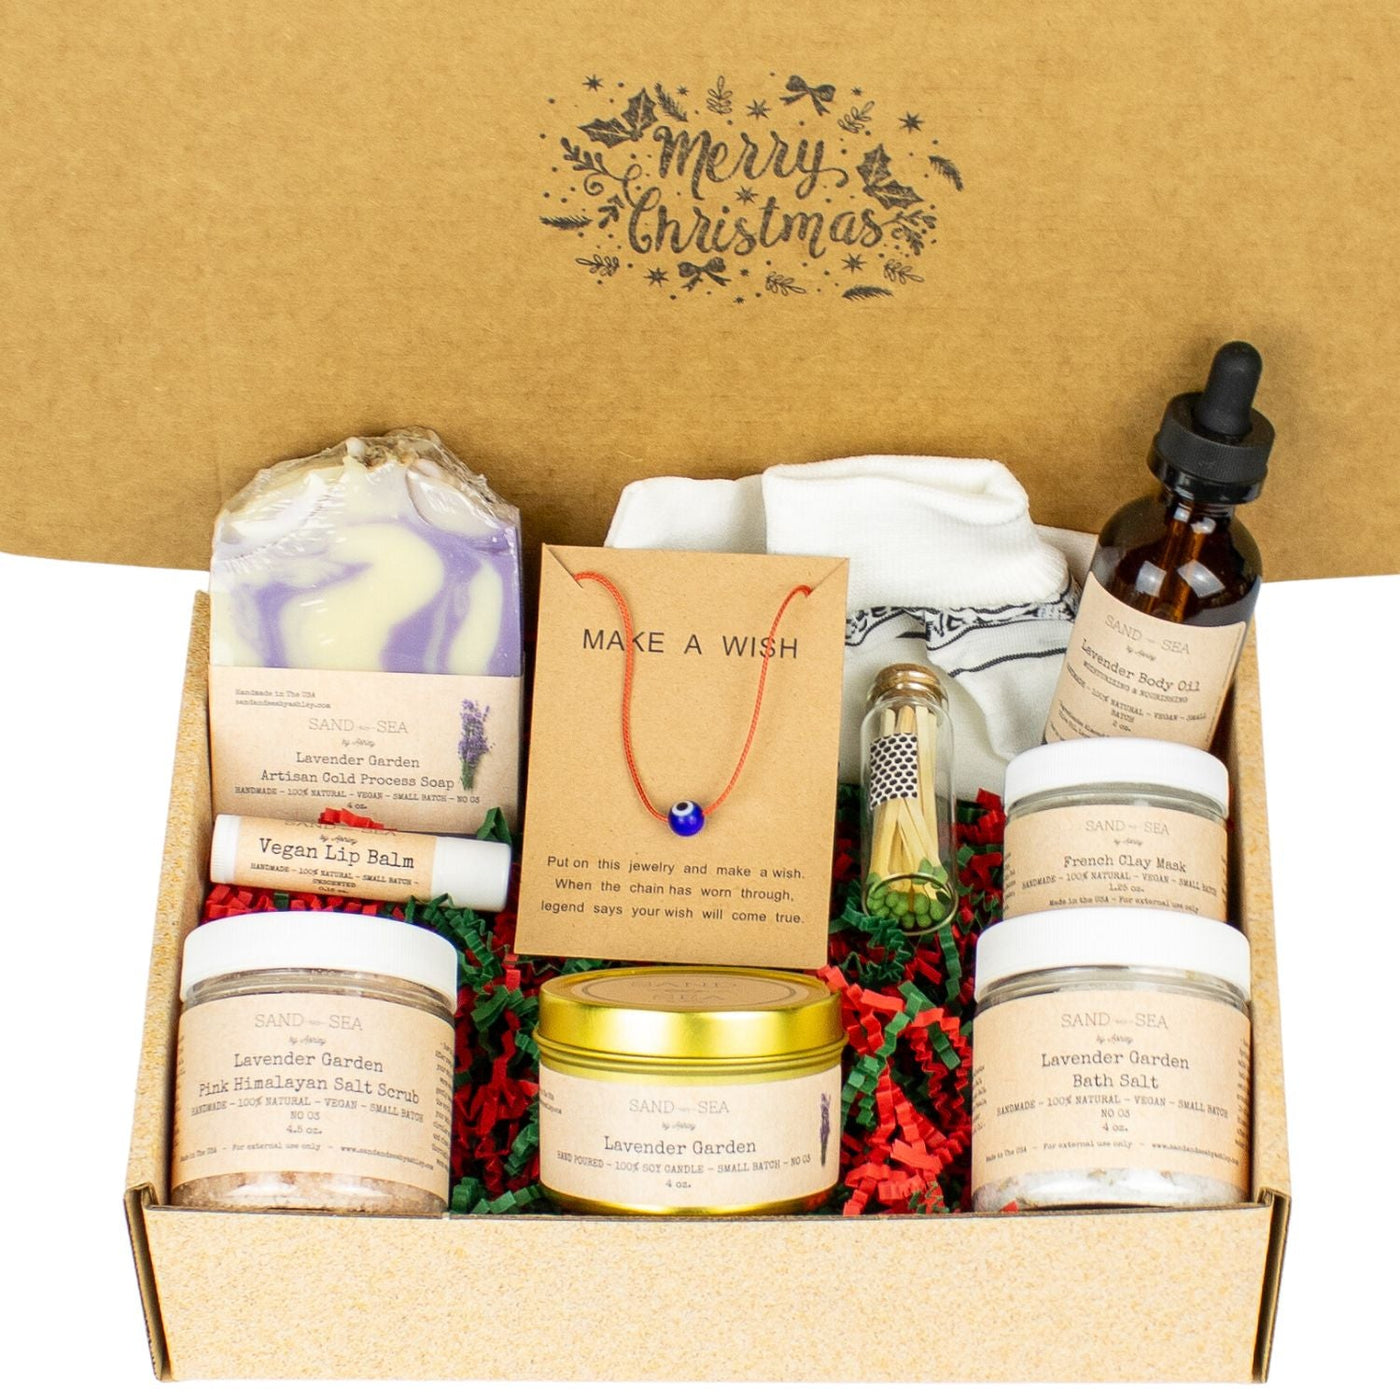 Christmas Spa Gift Baskets for Women - Handmade Artisan Lavender Spa Gift Set for Her 10 pieces - Sand & Sea by Ashley